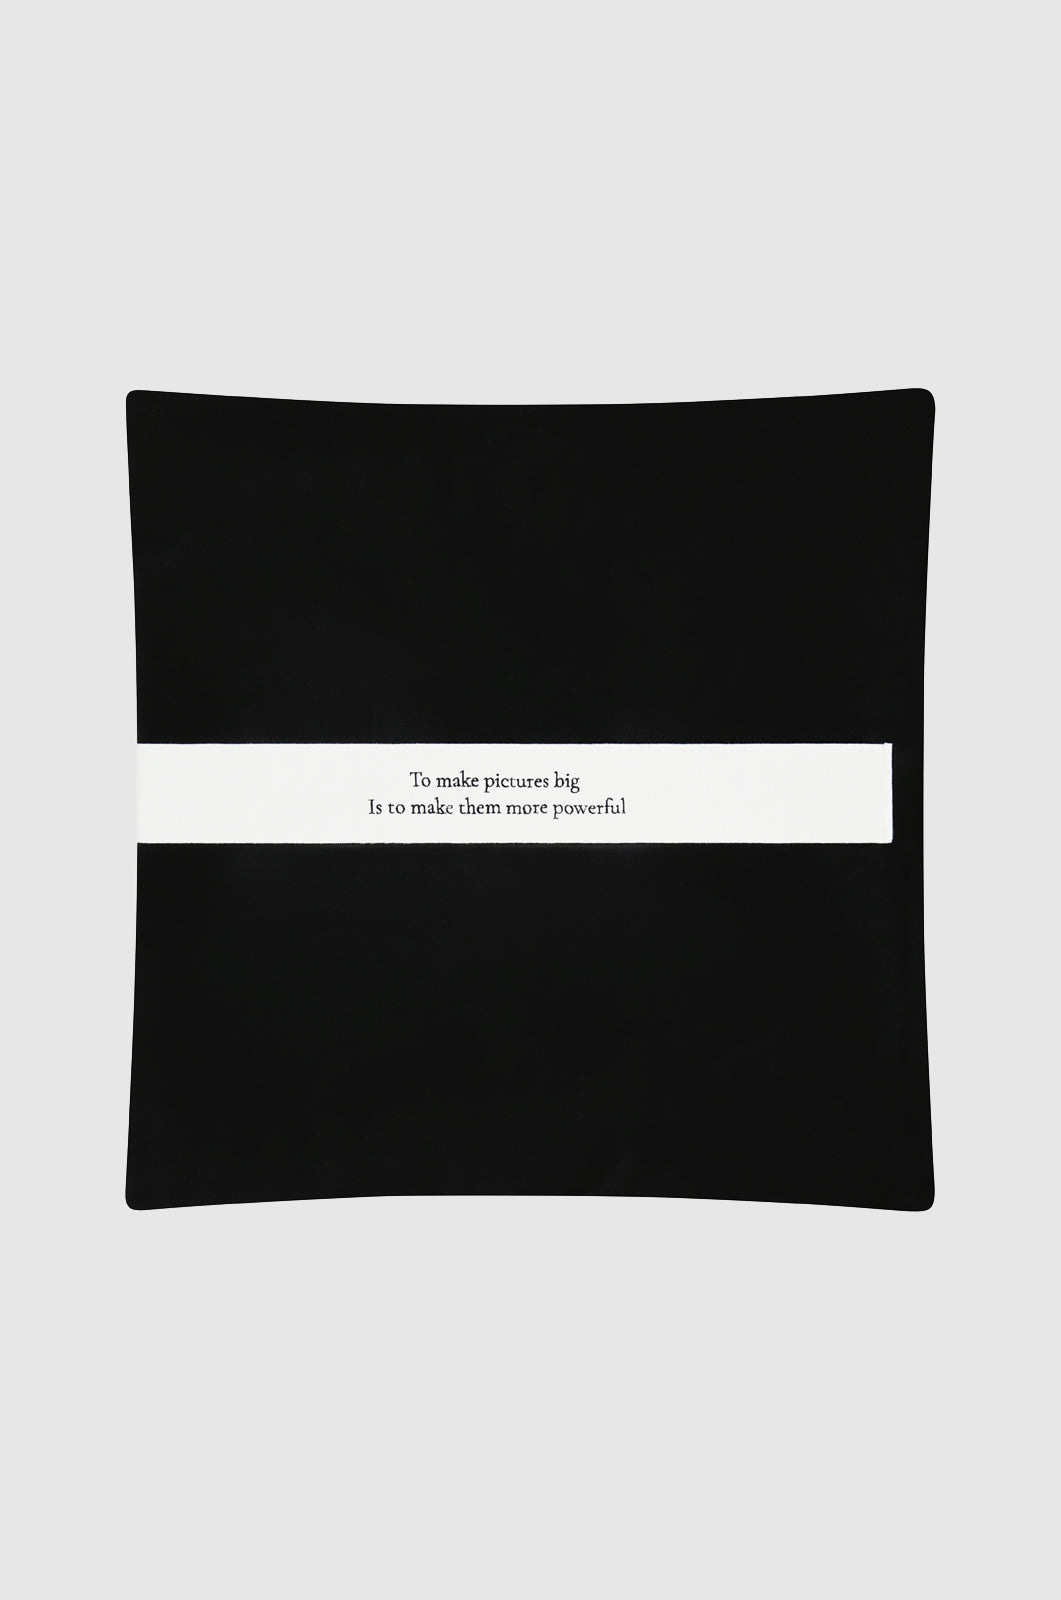 black leather sham featuring "To make pictures big is to make them powerful" - a quote attributed to Mapplethorpe.